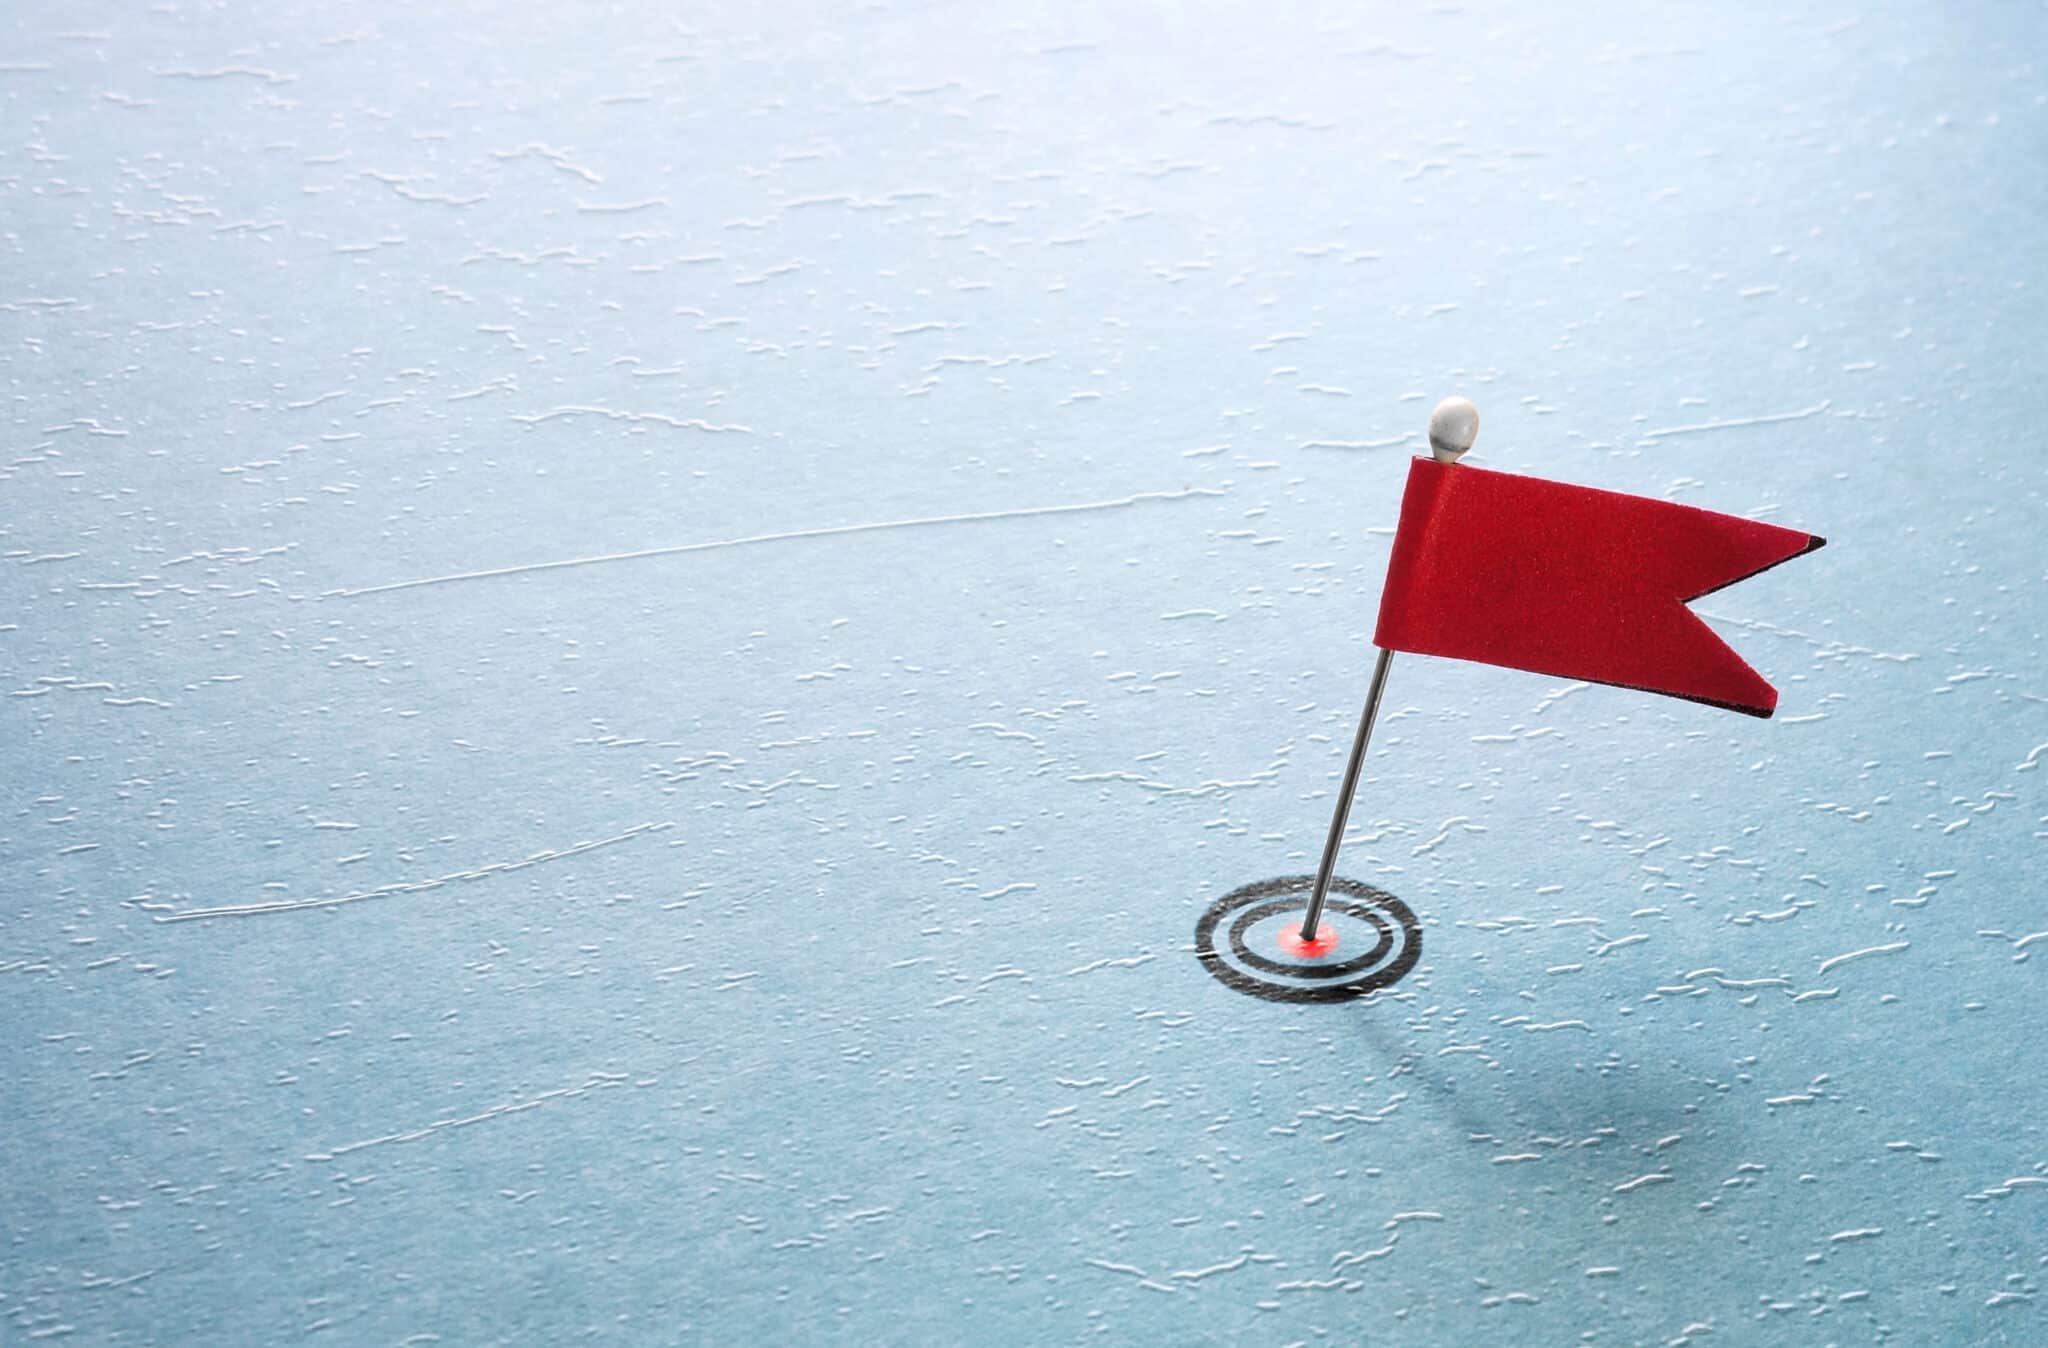 Pin target and red flag symbolize how transcription services help insurers manage fraud red flags.